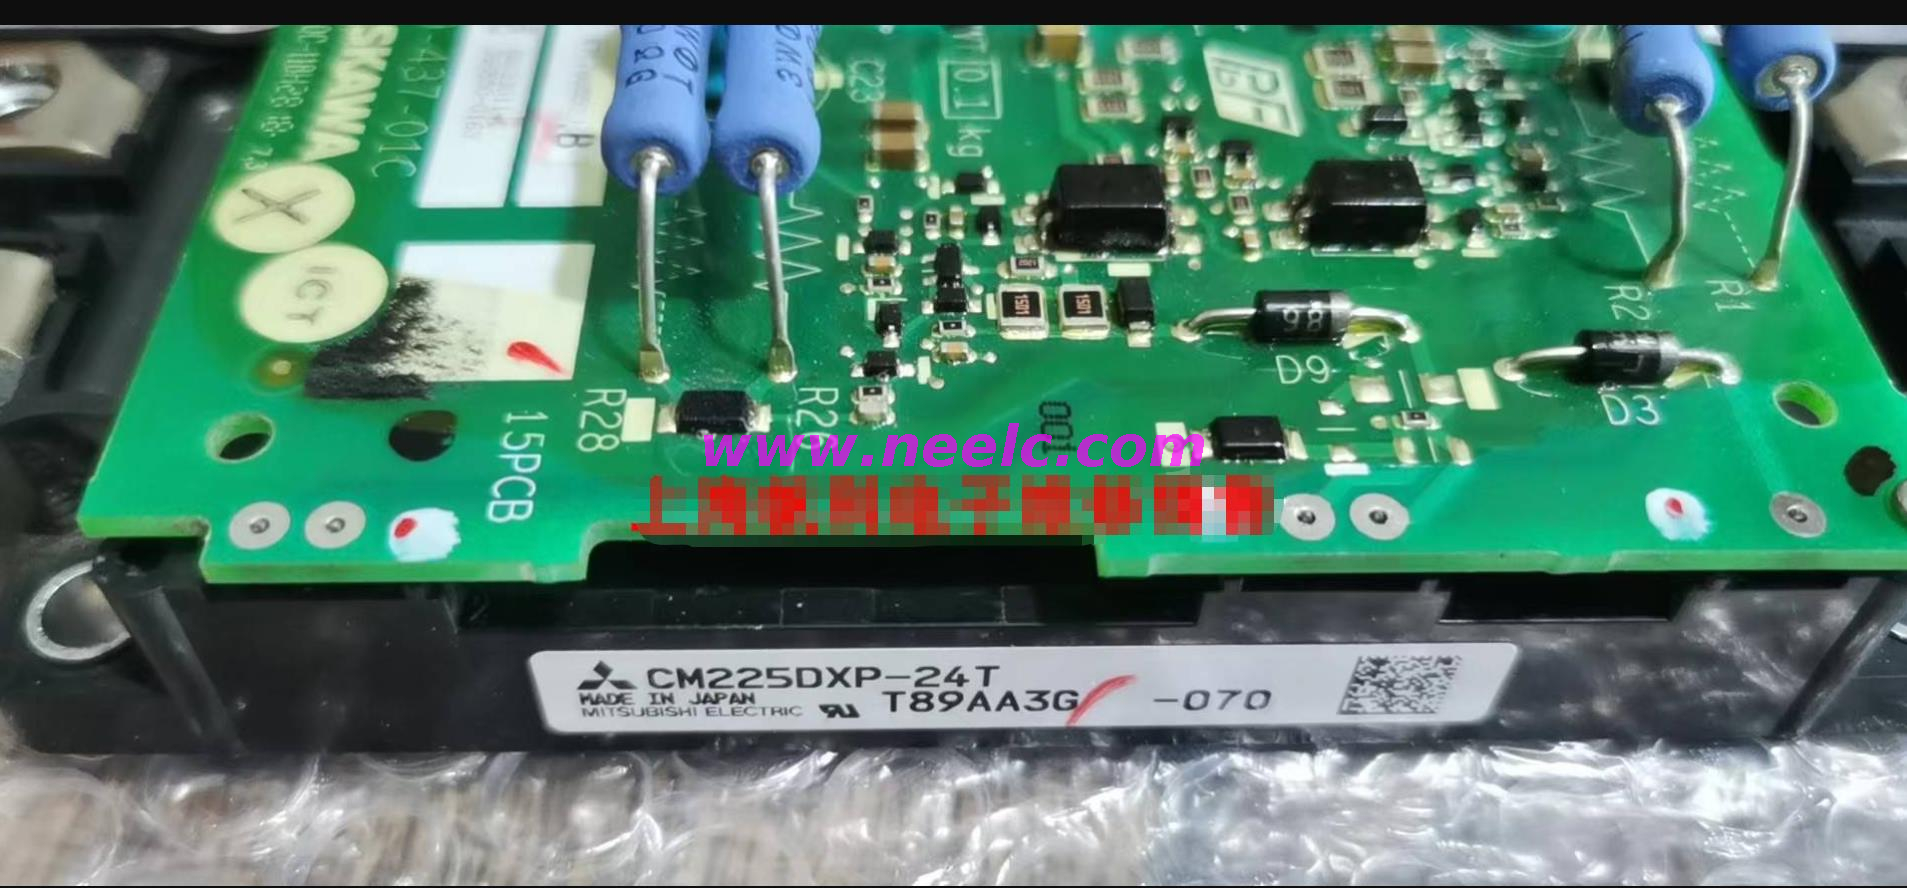 ETC760550 400-089-437-01C Used in good condition control board with IGBT Module